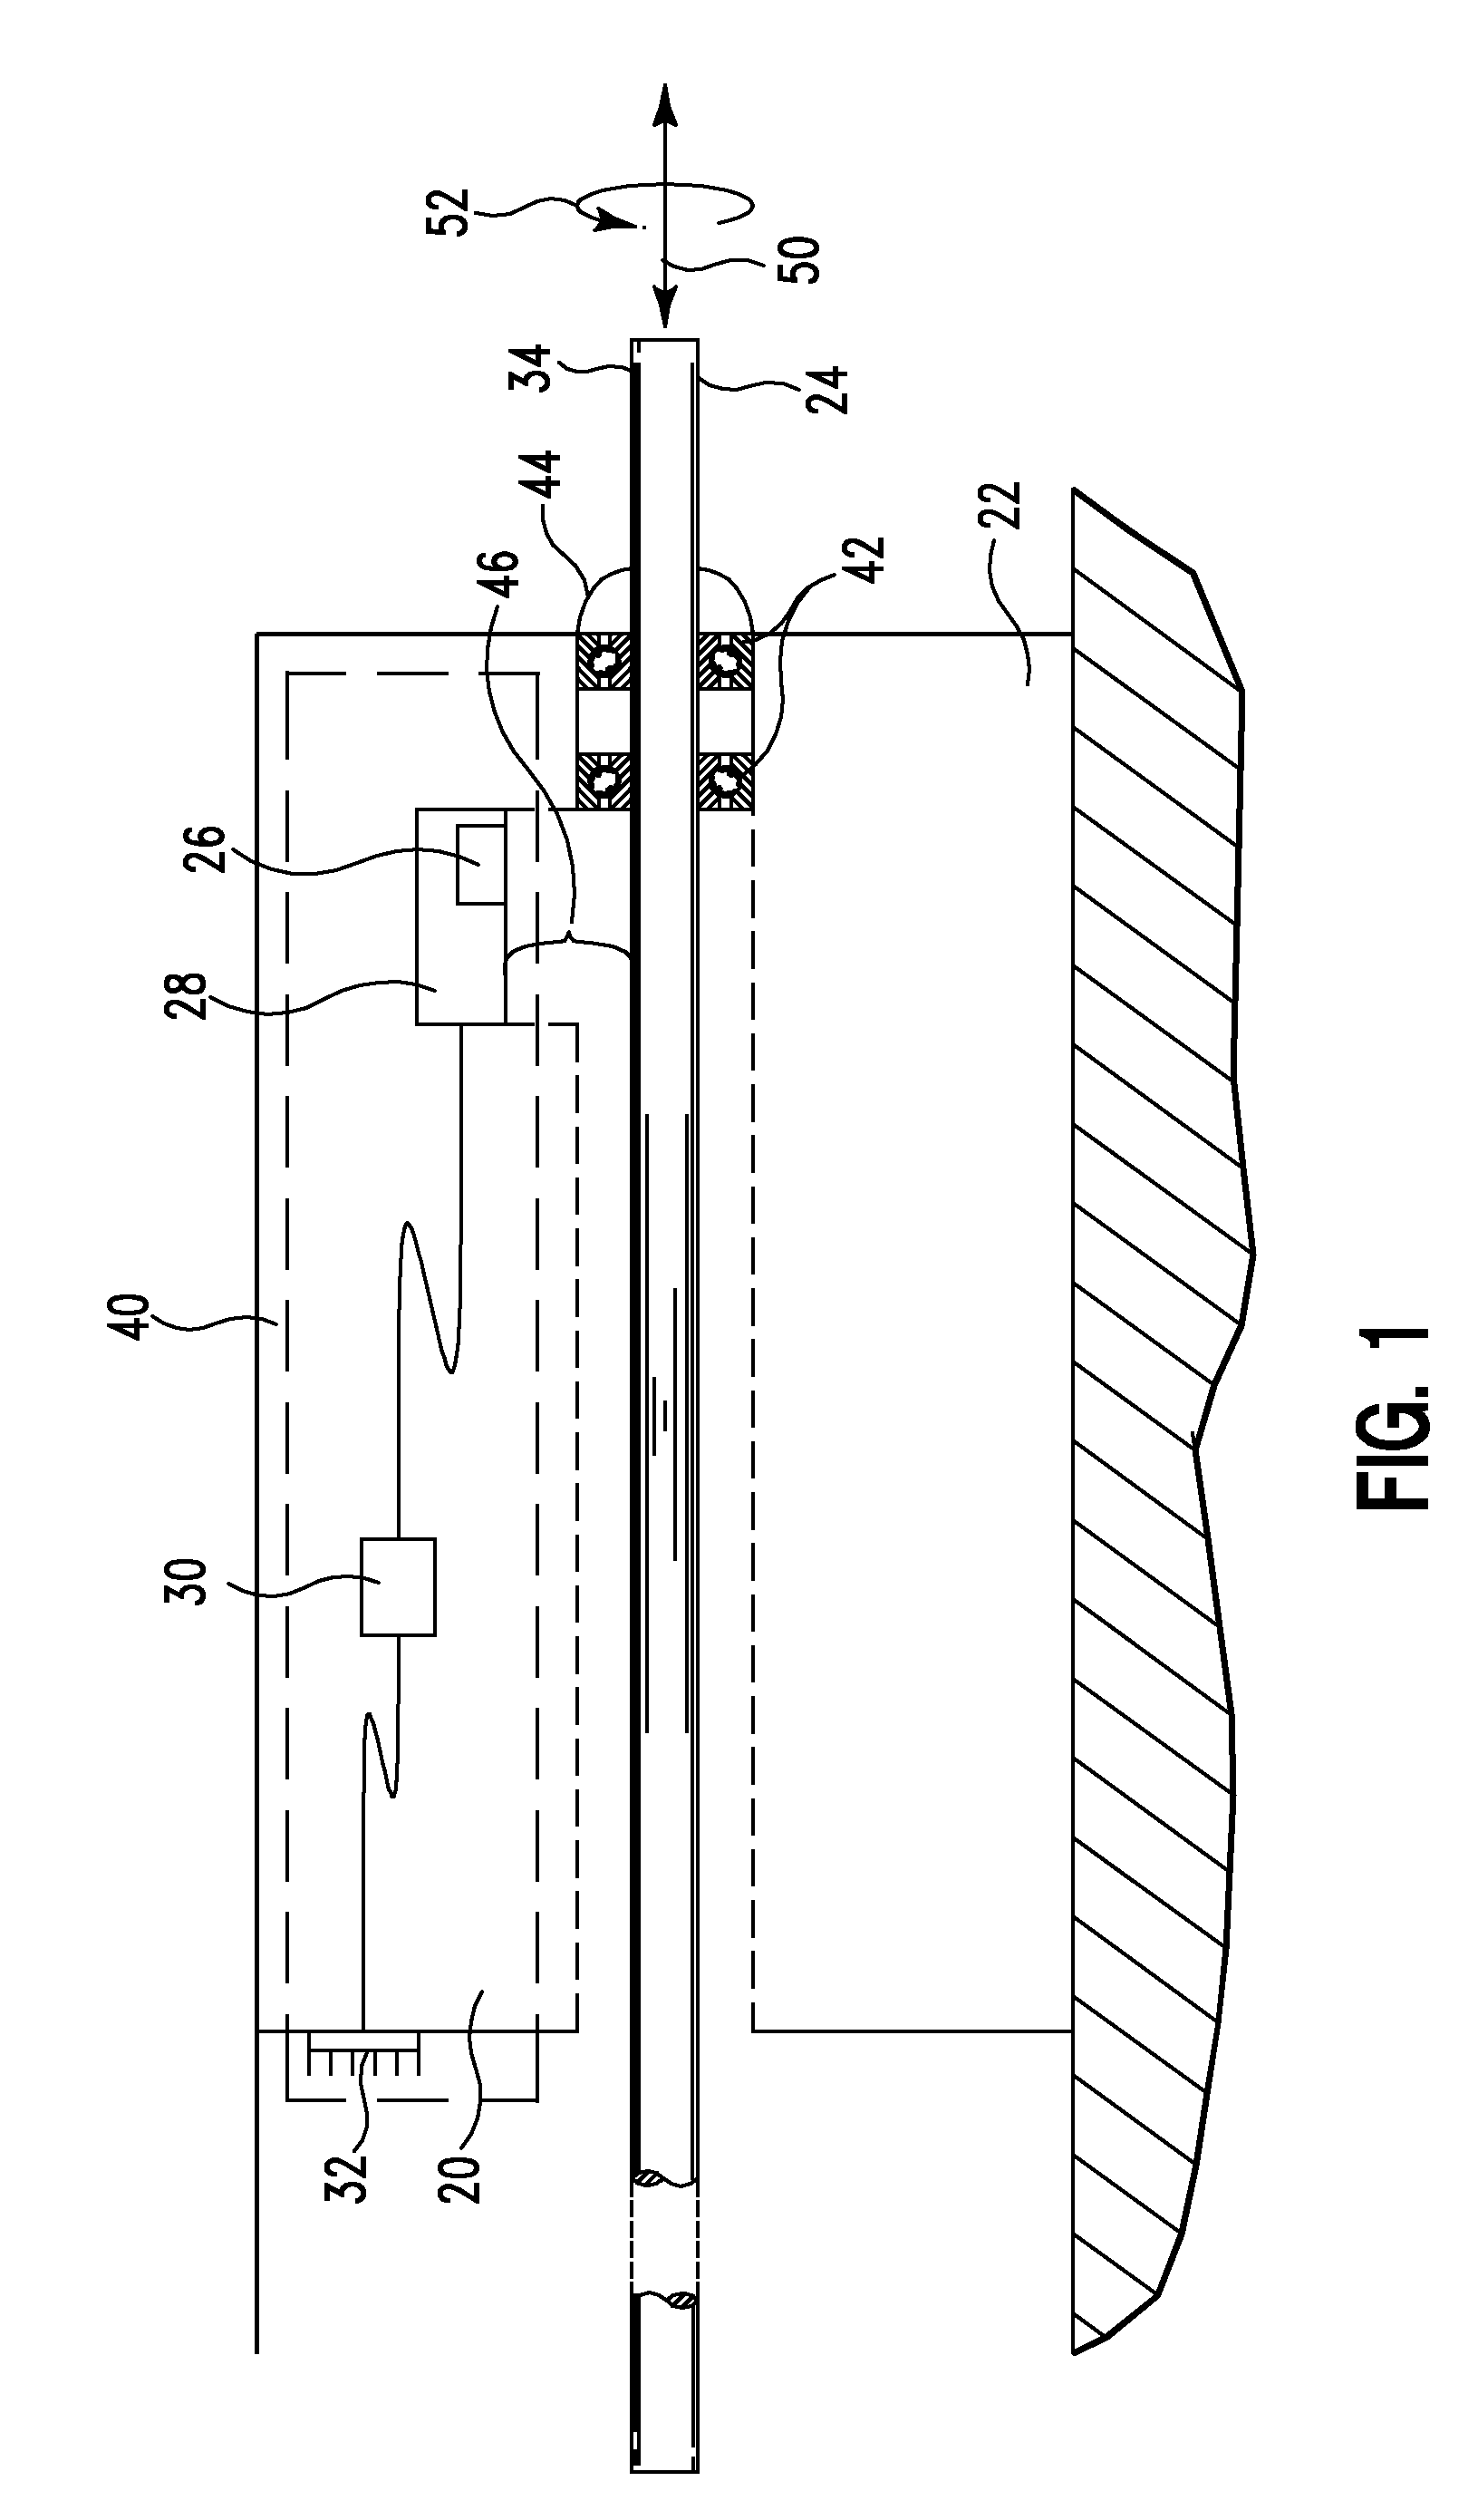 Optical Linear and Rotation Displacement Sensor